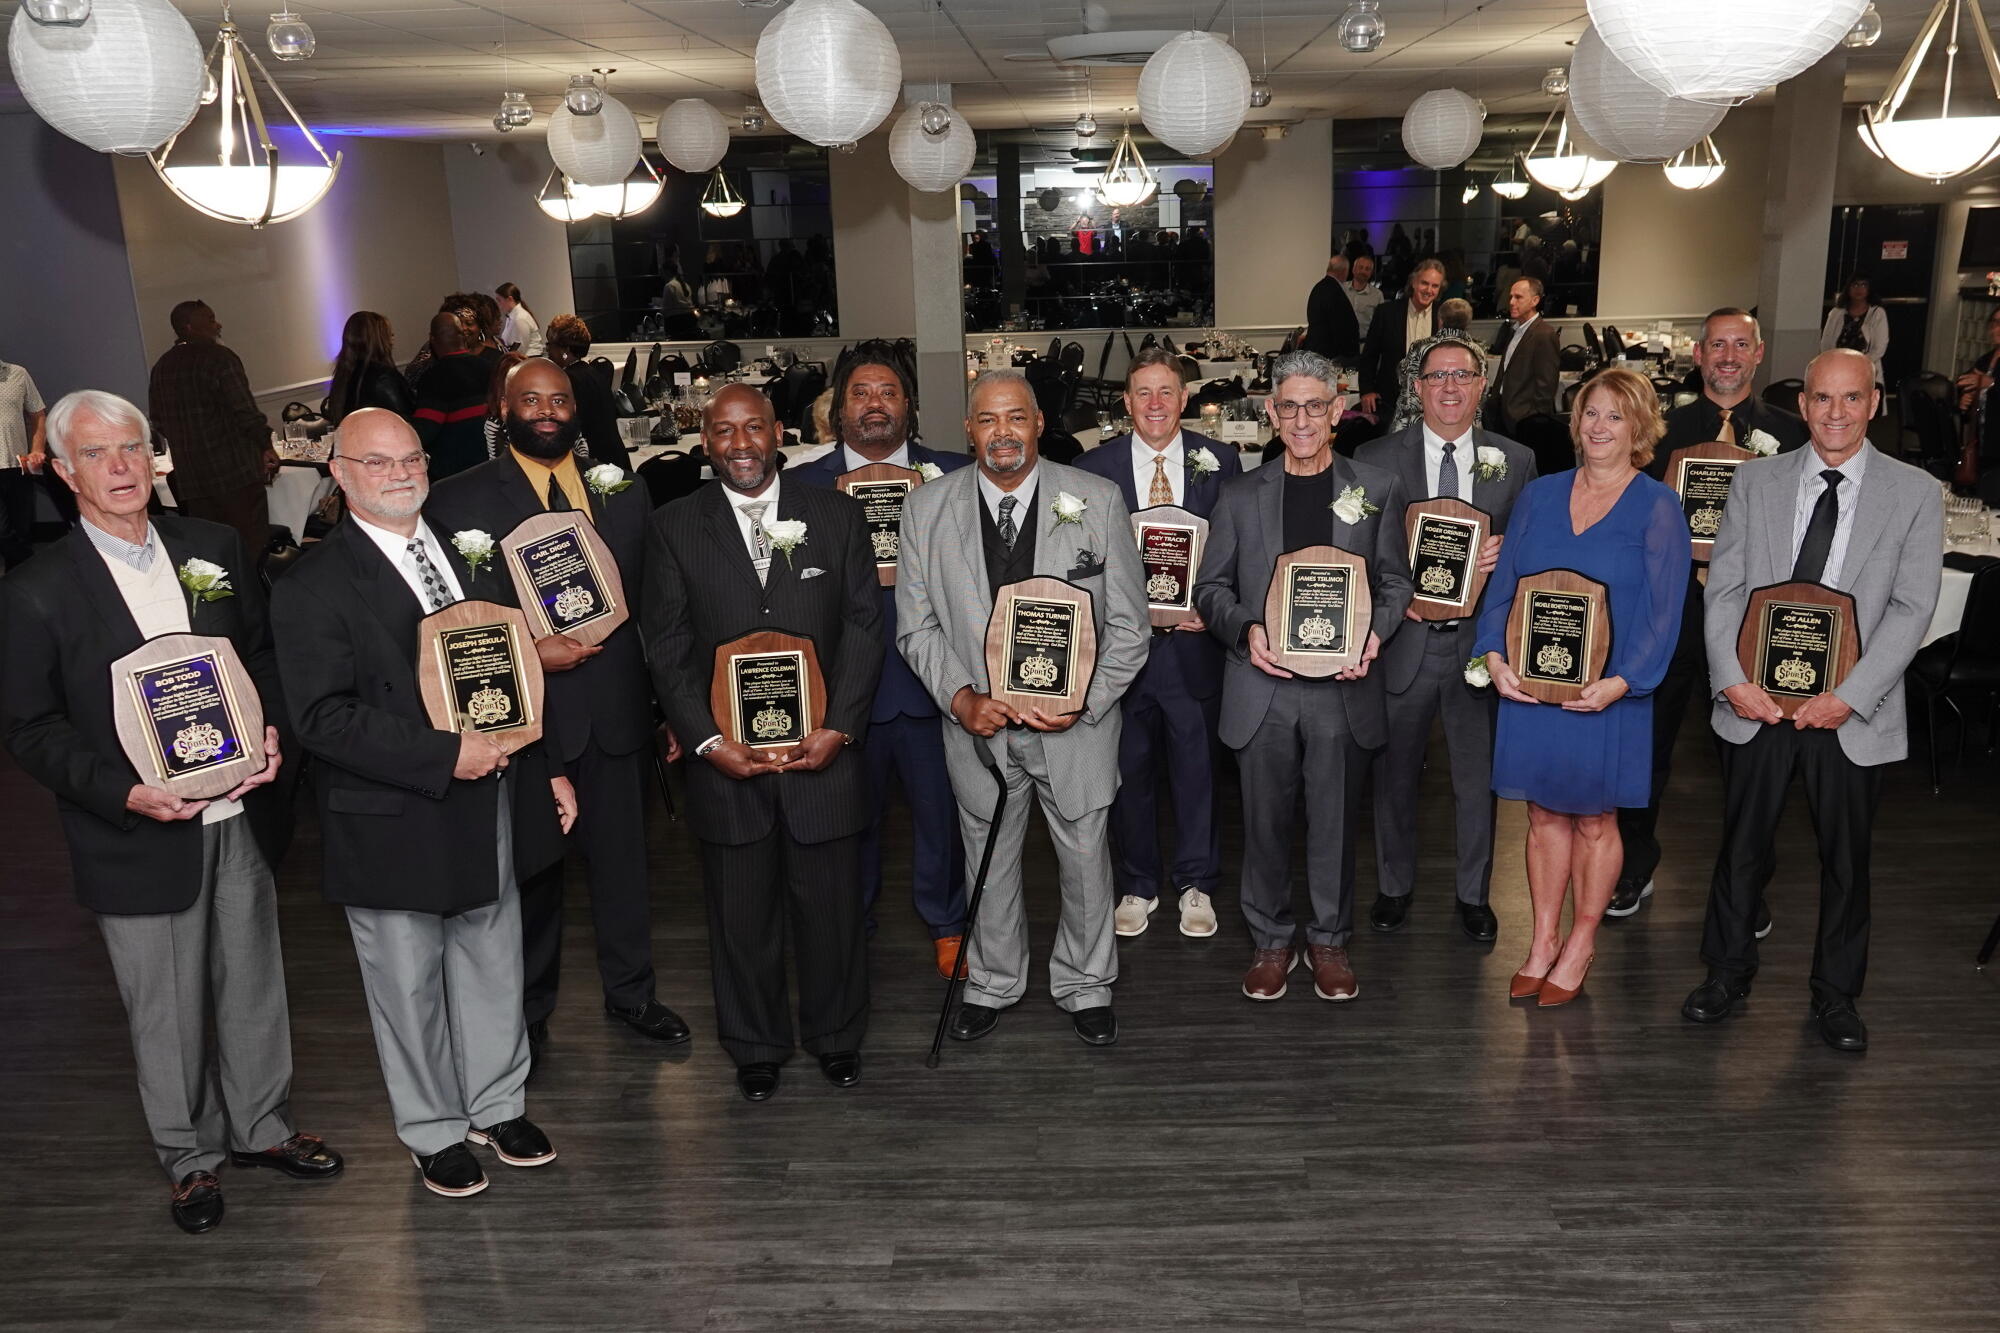 2022 honored inductees at the Warren sport hall of fame